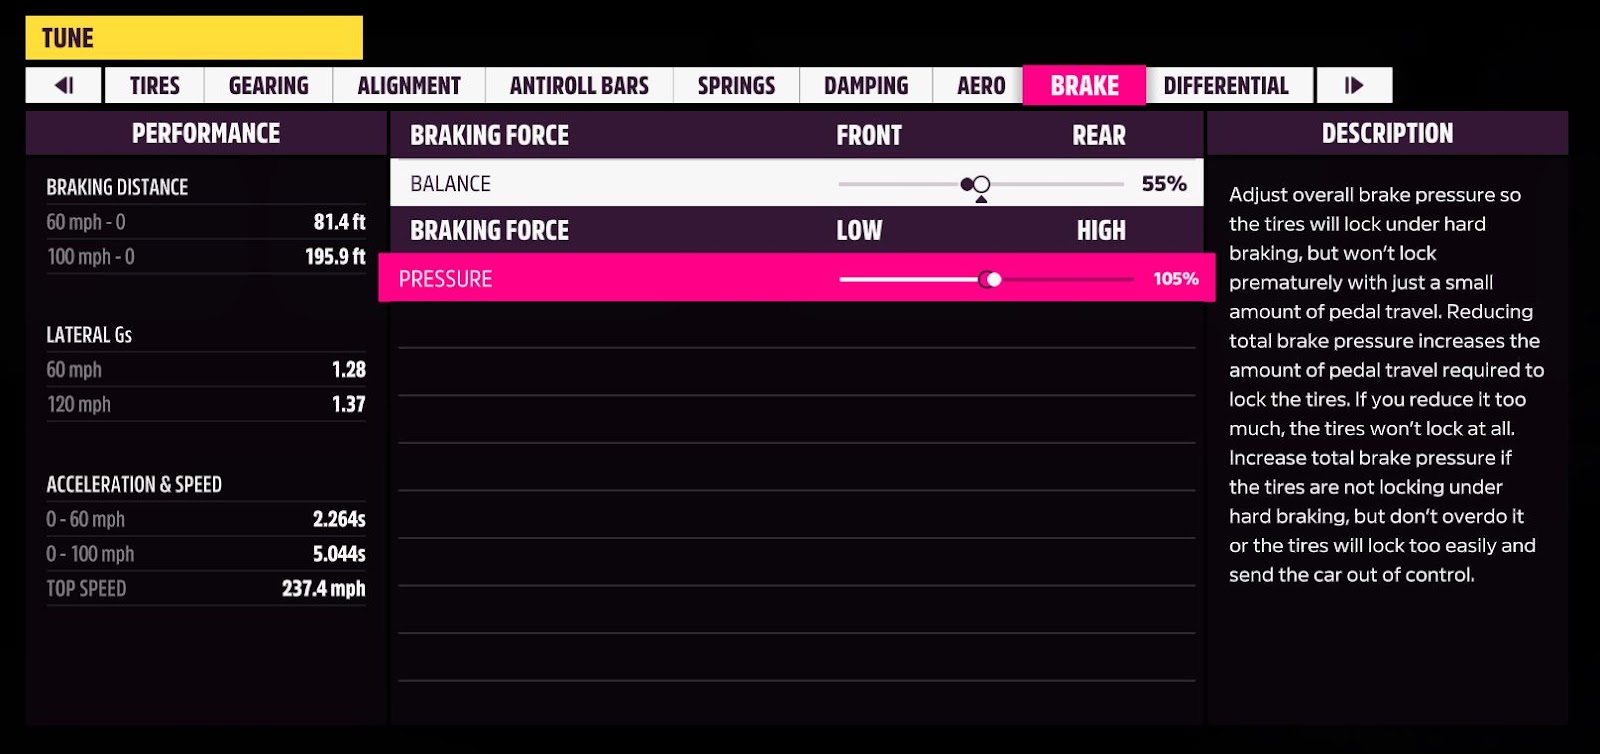 Forza Horizon 4: How to use tuning to improve your car